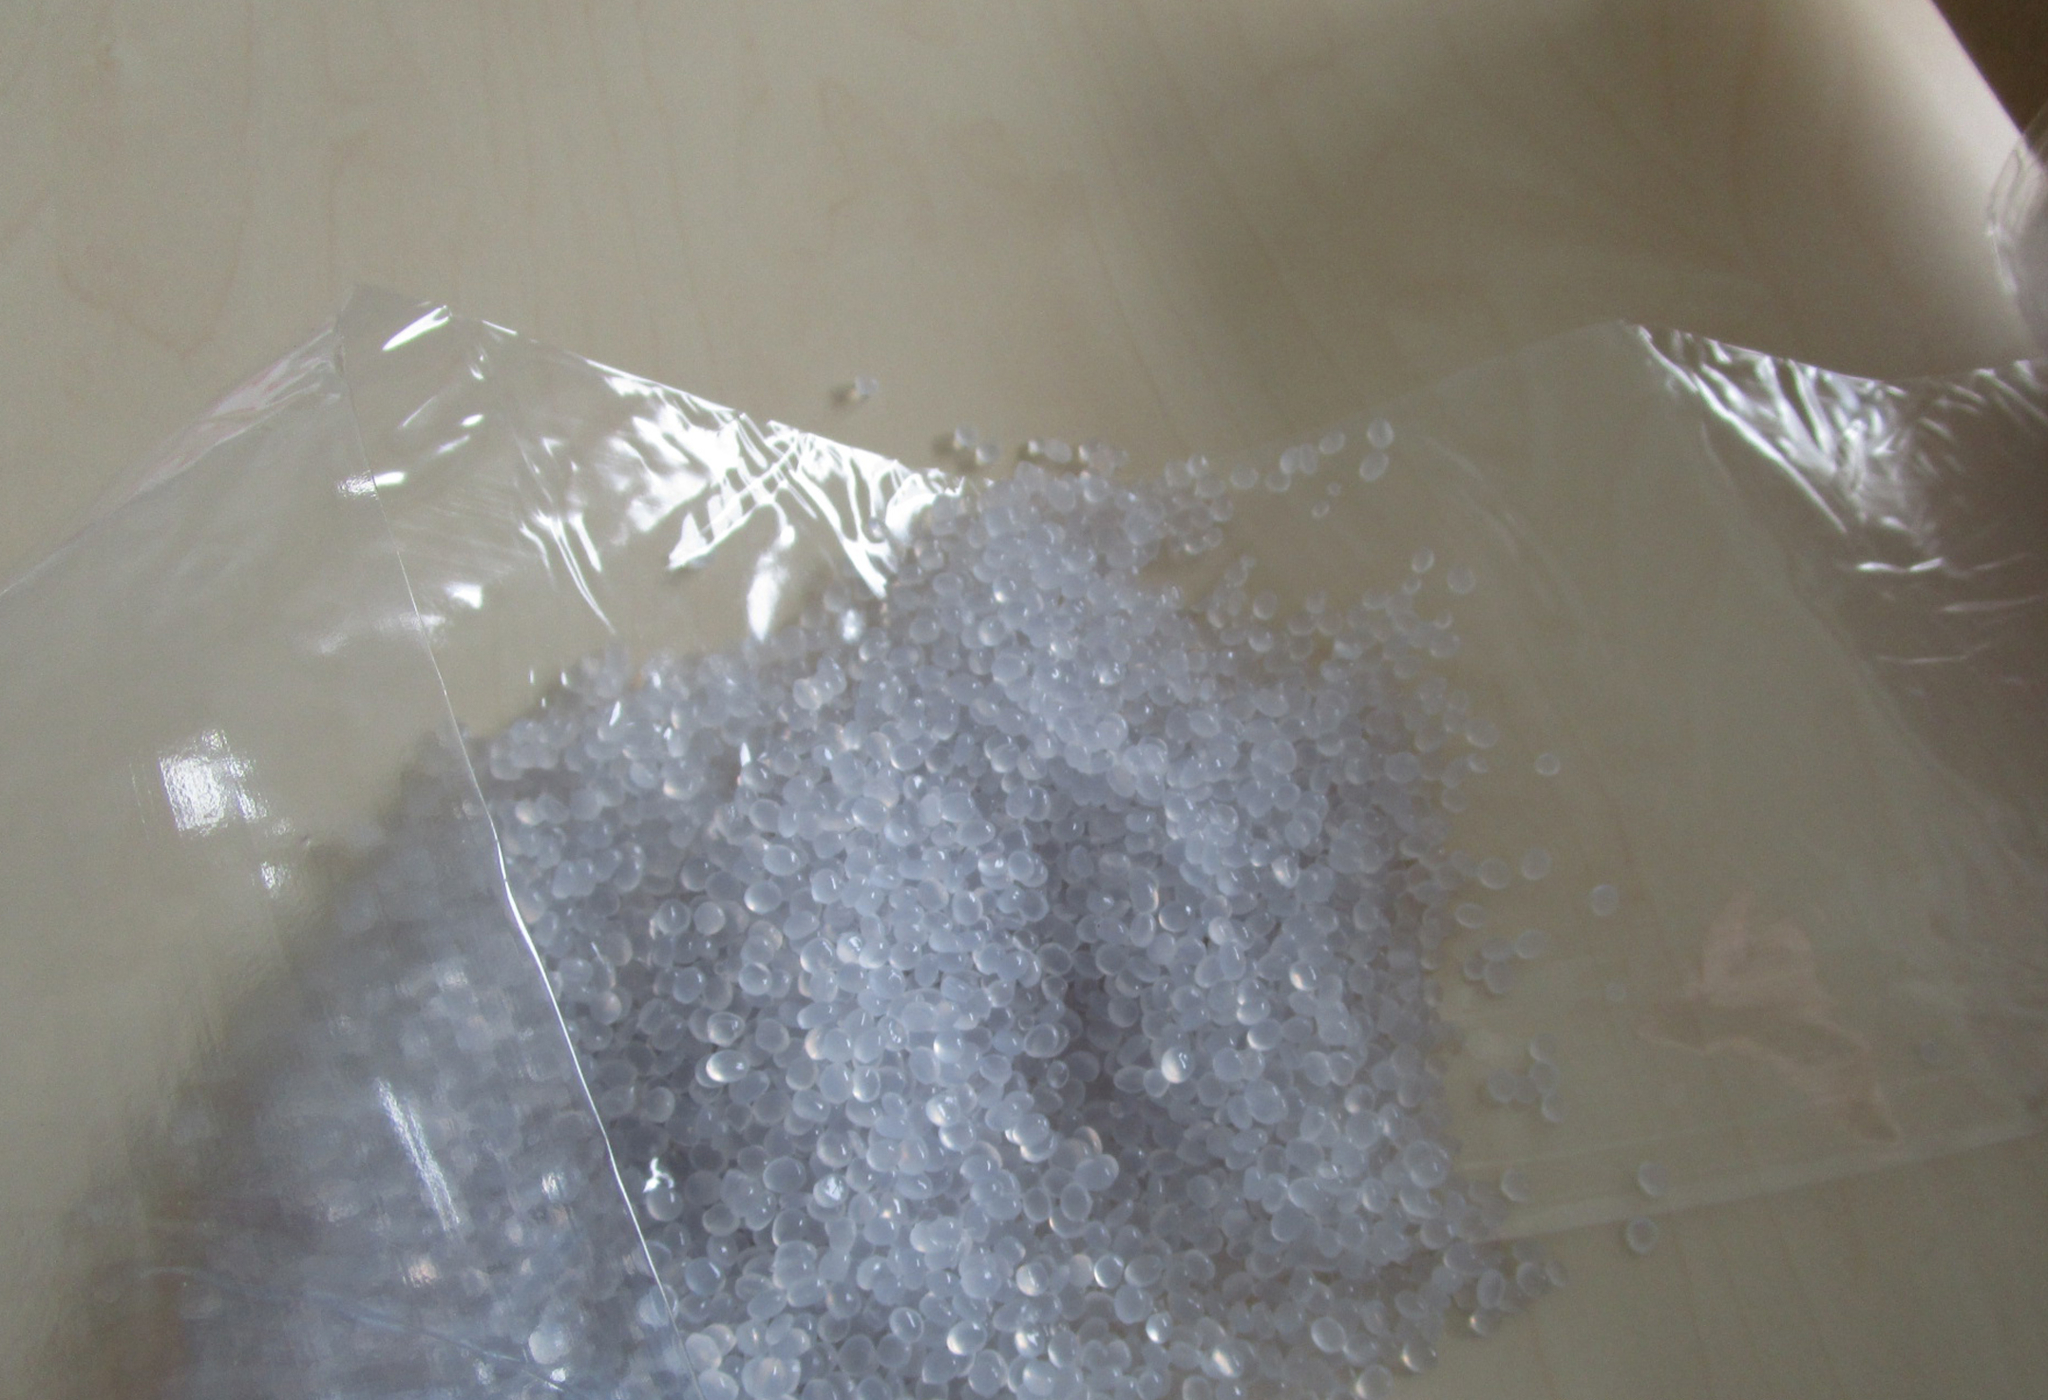 The photo shows a transparent foil alongside the granules used to produce it.